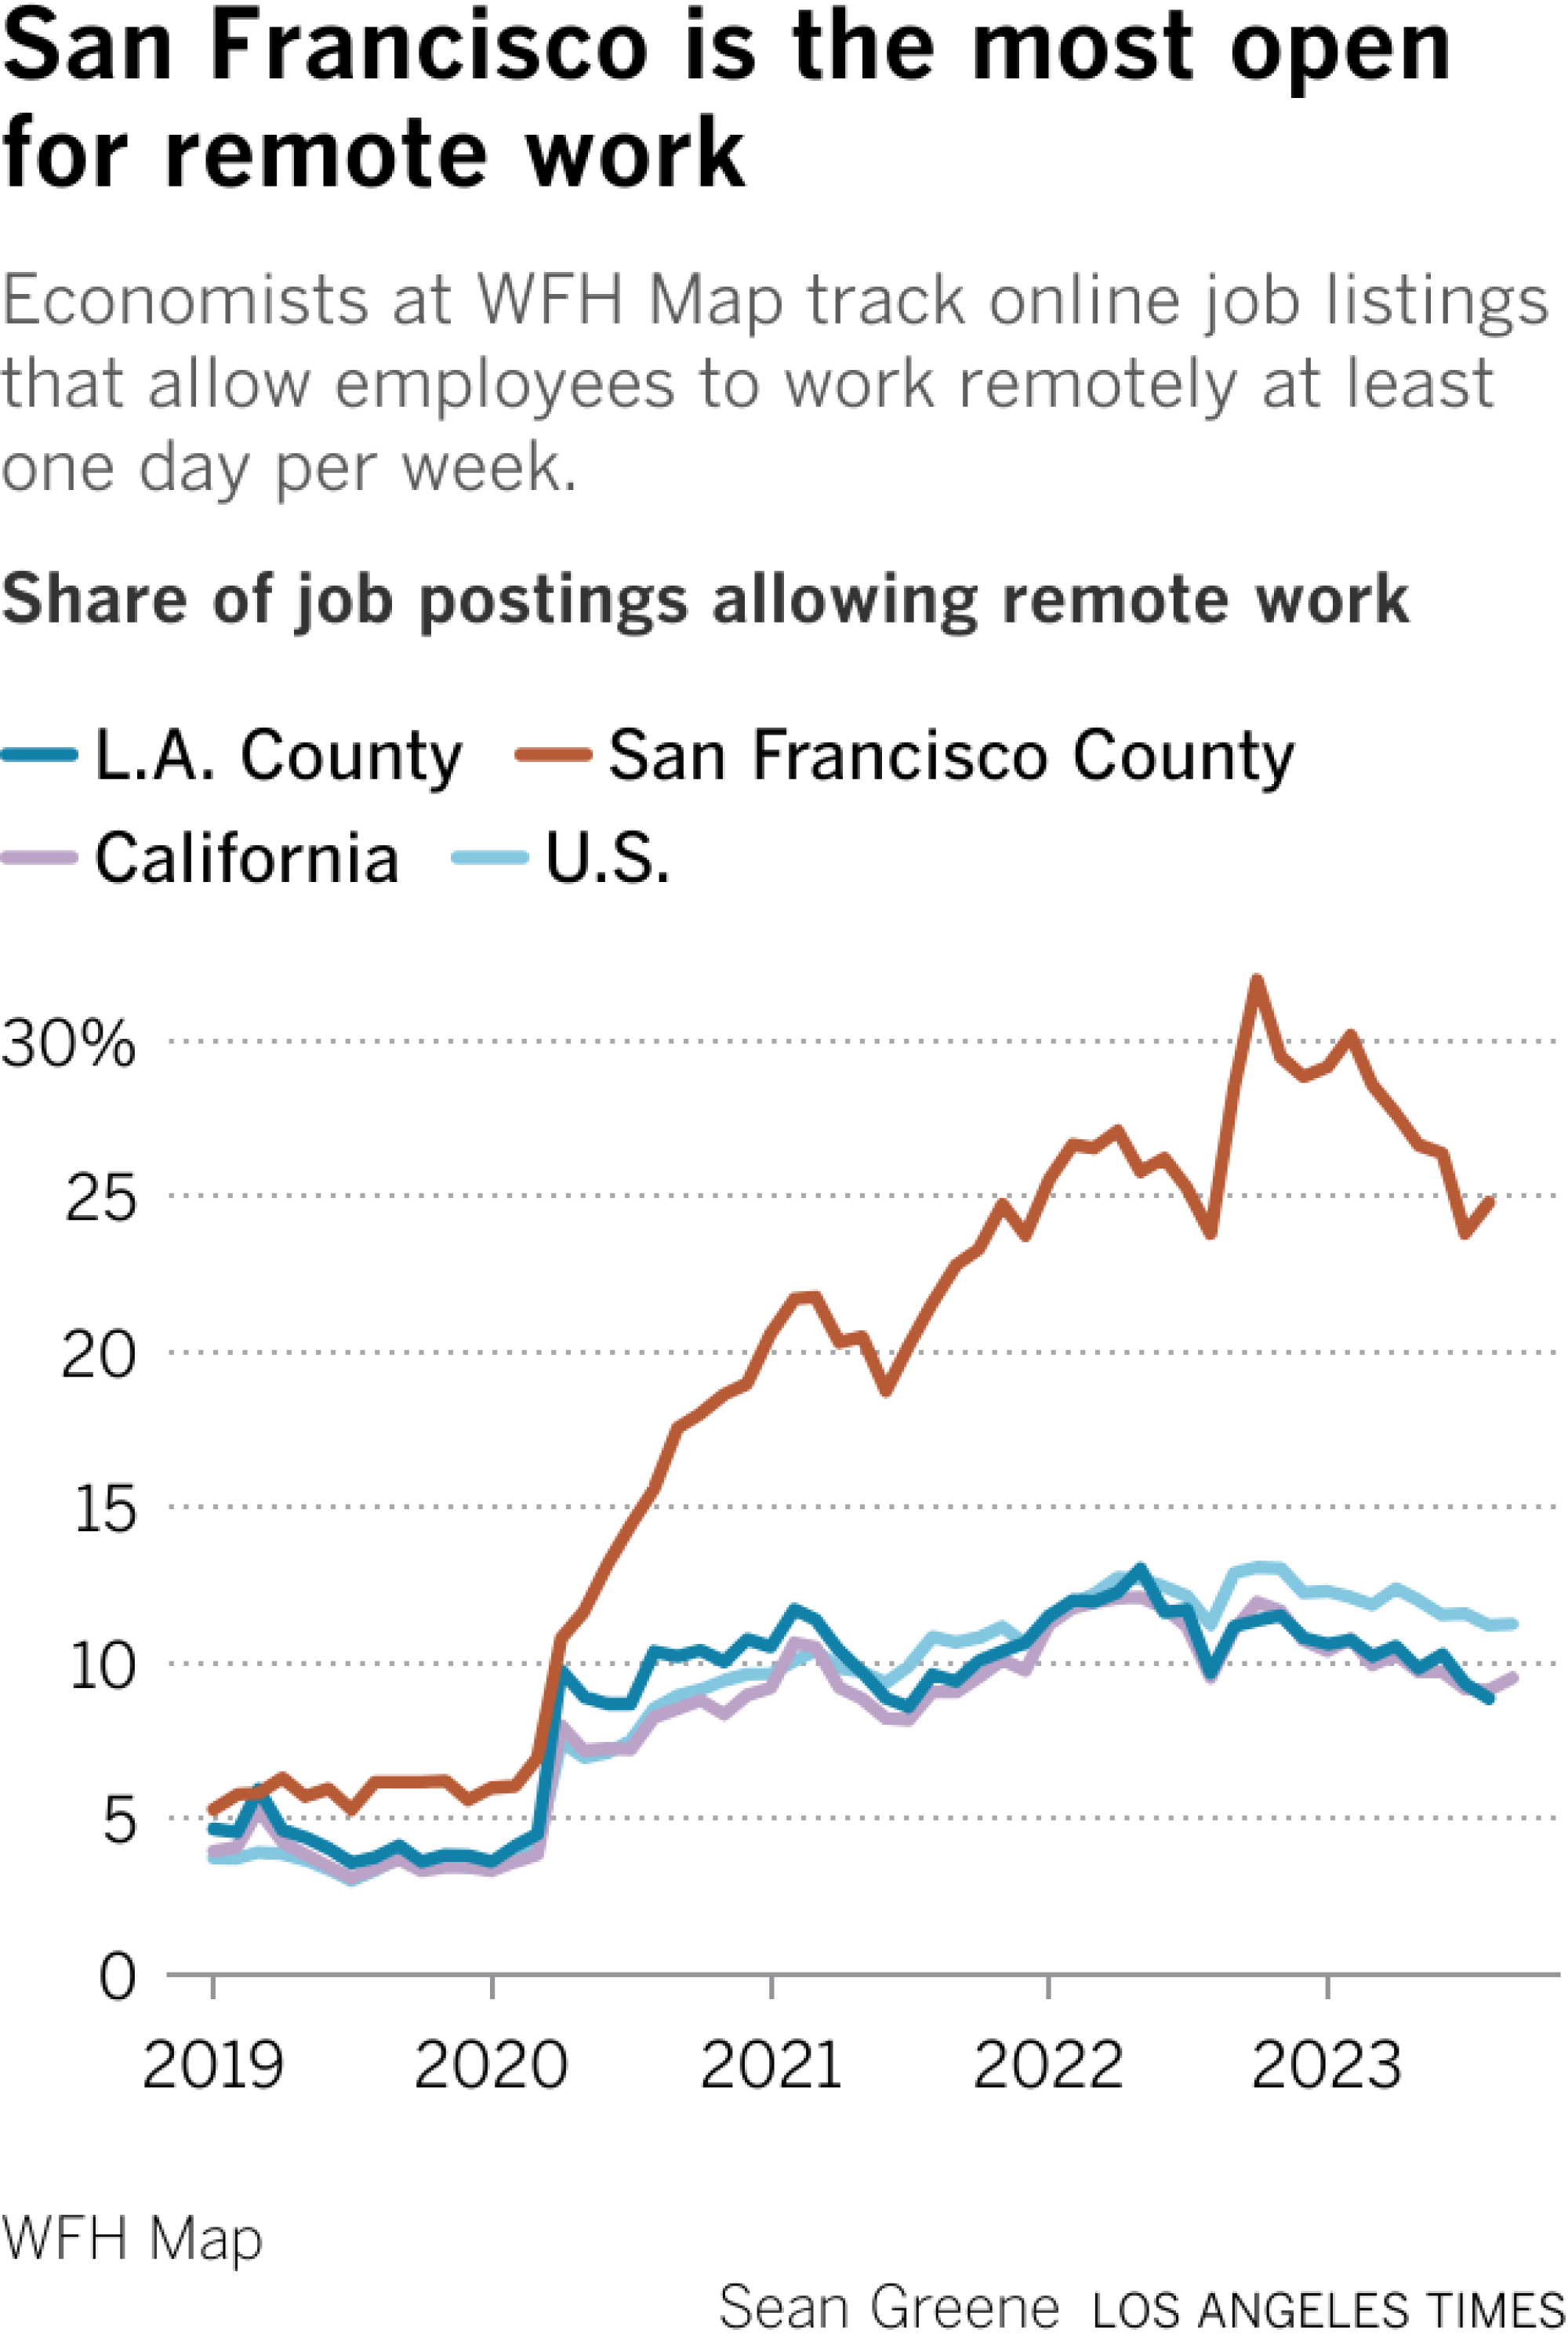 Line chart shows the share of online job postings permitting remote work in San Francisco and Los Angeles counties compared with the California and U.S. shares. In 2020, remote work surged but leveled off in all areas except San Francisco, which continued to surge through 2022.